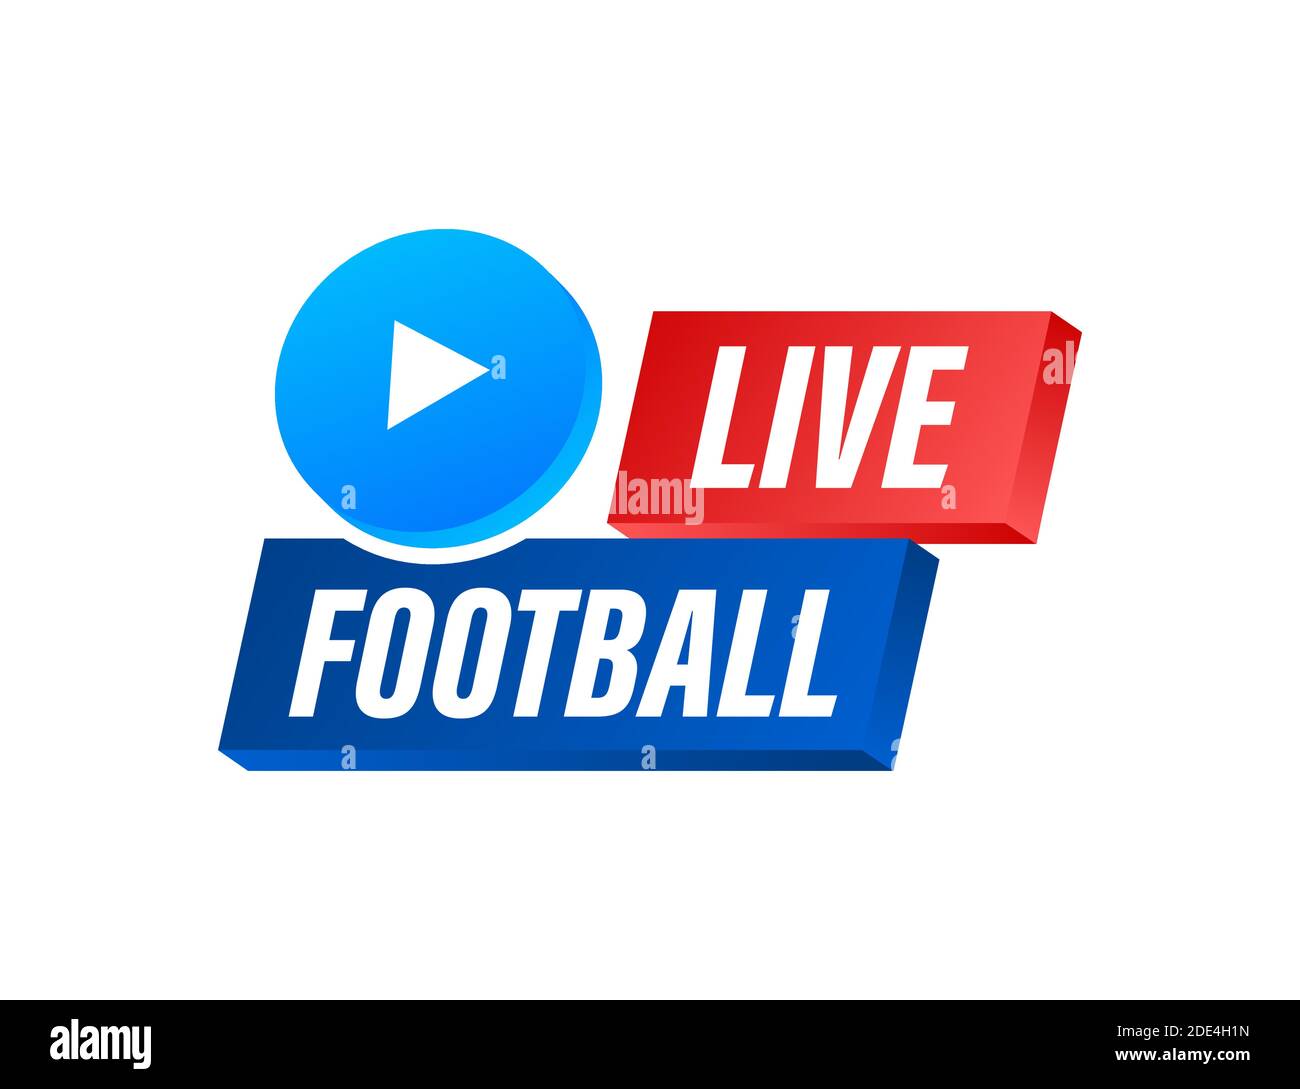 Live Football streaming Icon, Button for broadcasting or online football stream